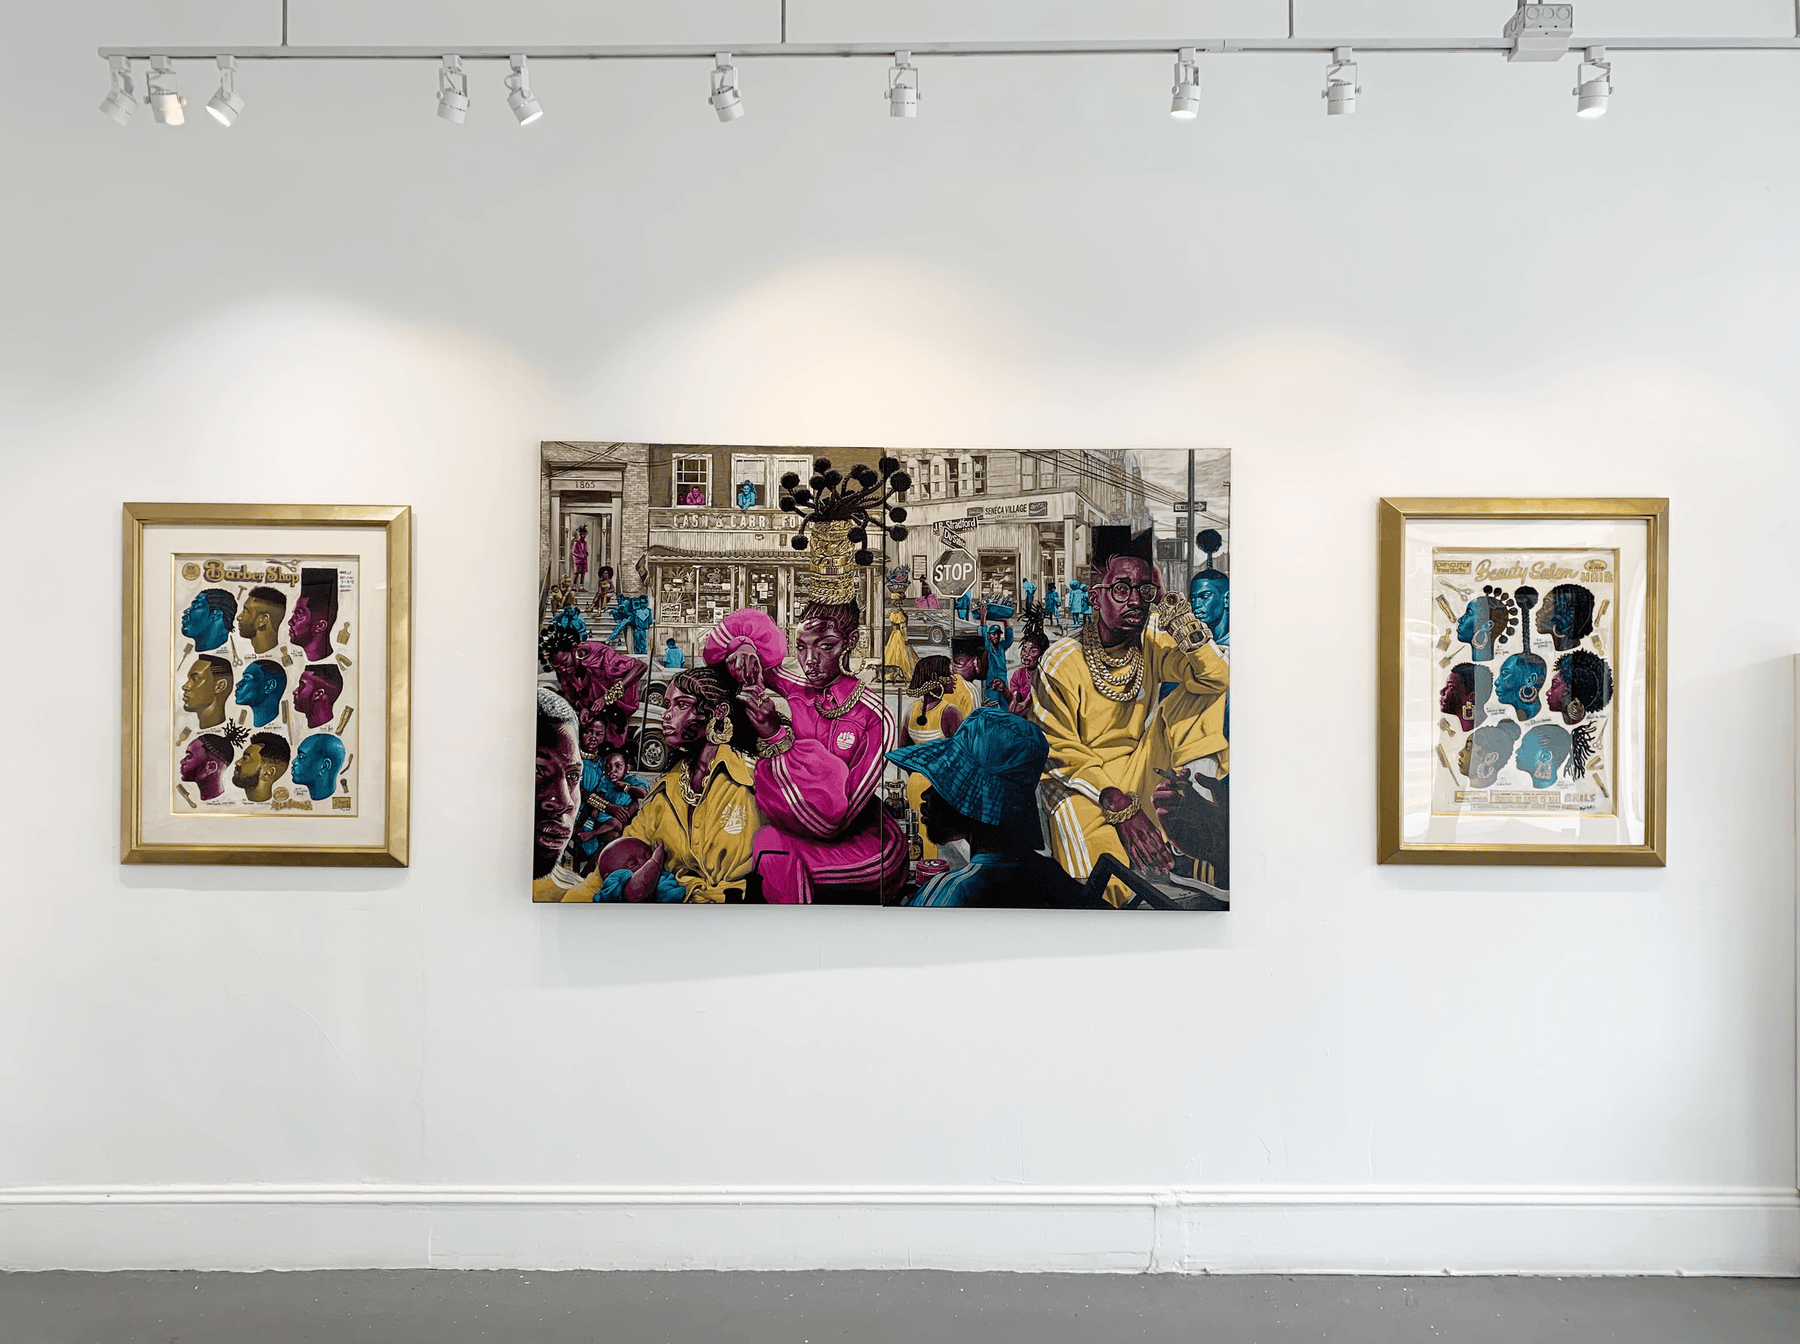 Install image from Serge Gay Jr. Prince 2 Queens Exhibition at Voss Gallery, San Francisco, October 10-31, 2020.